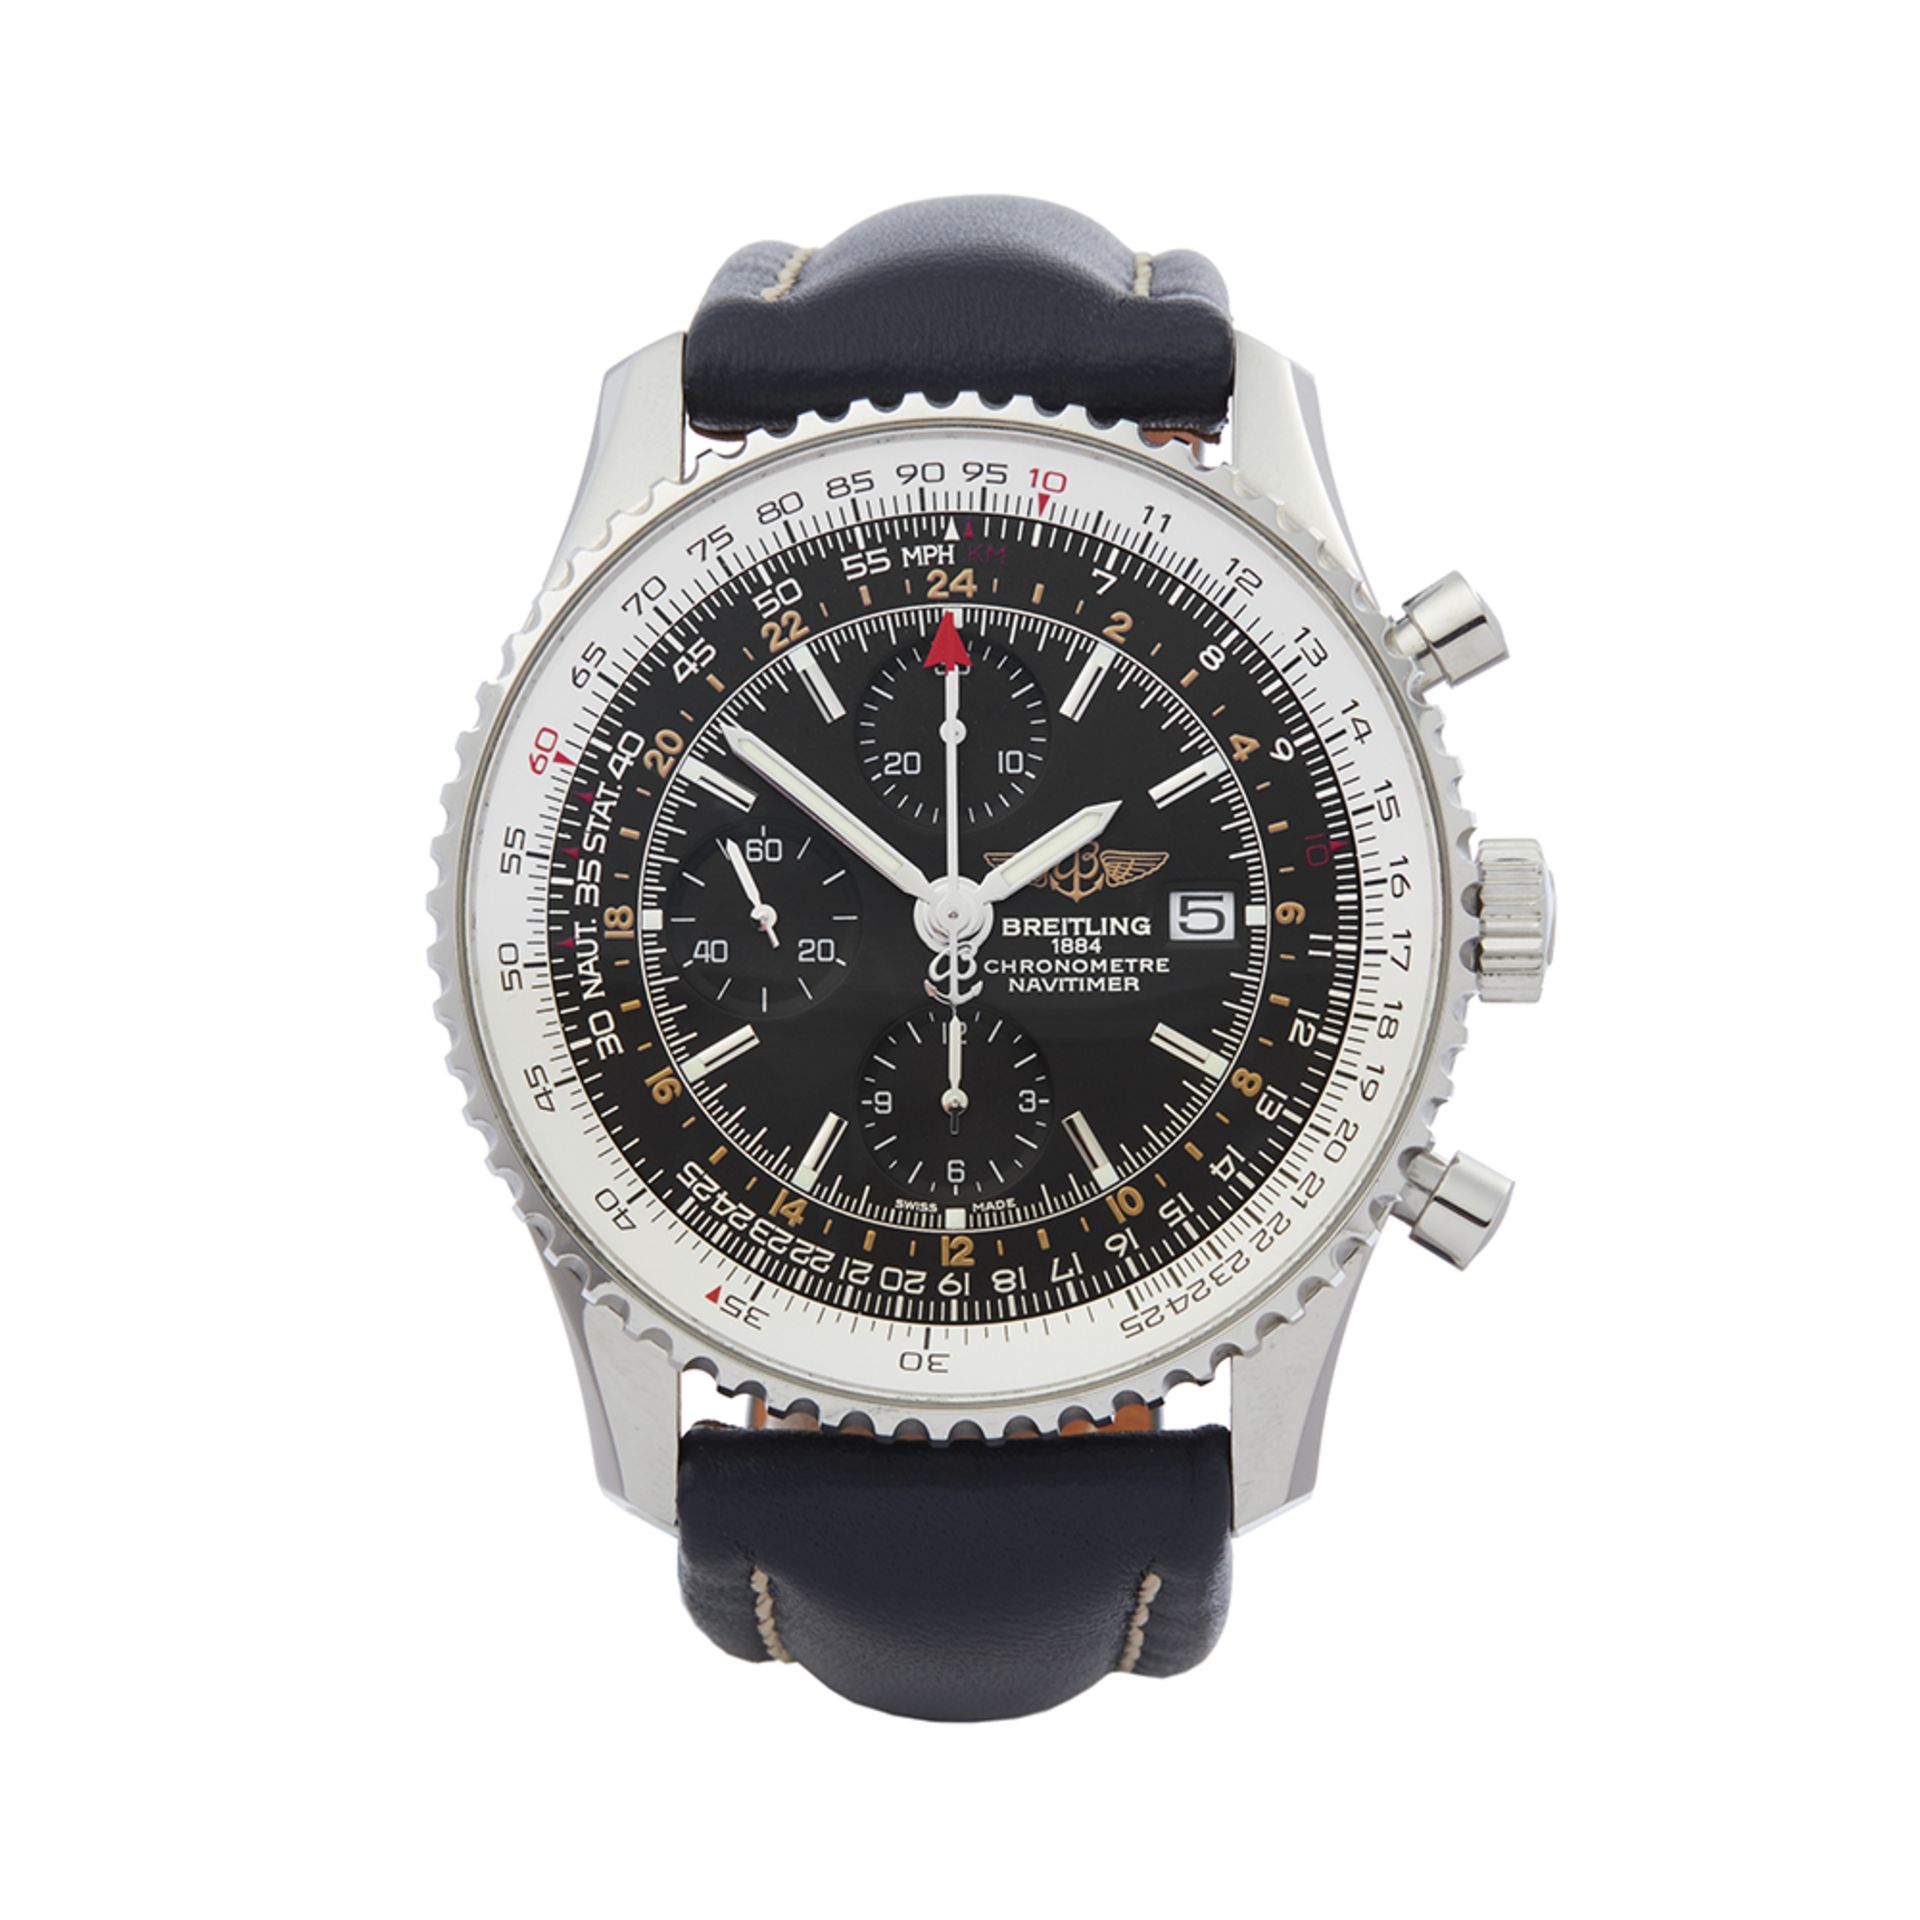 Breitling Navitimer Stainless Steel - A2432212 - Image 2 of 7